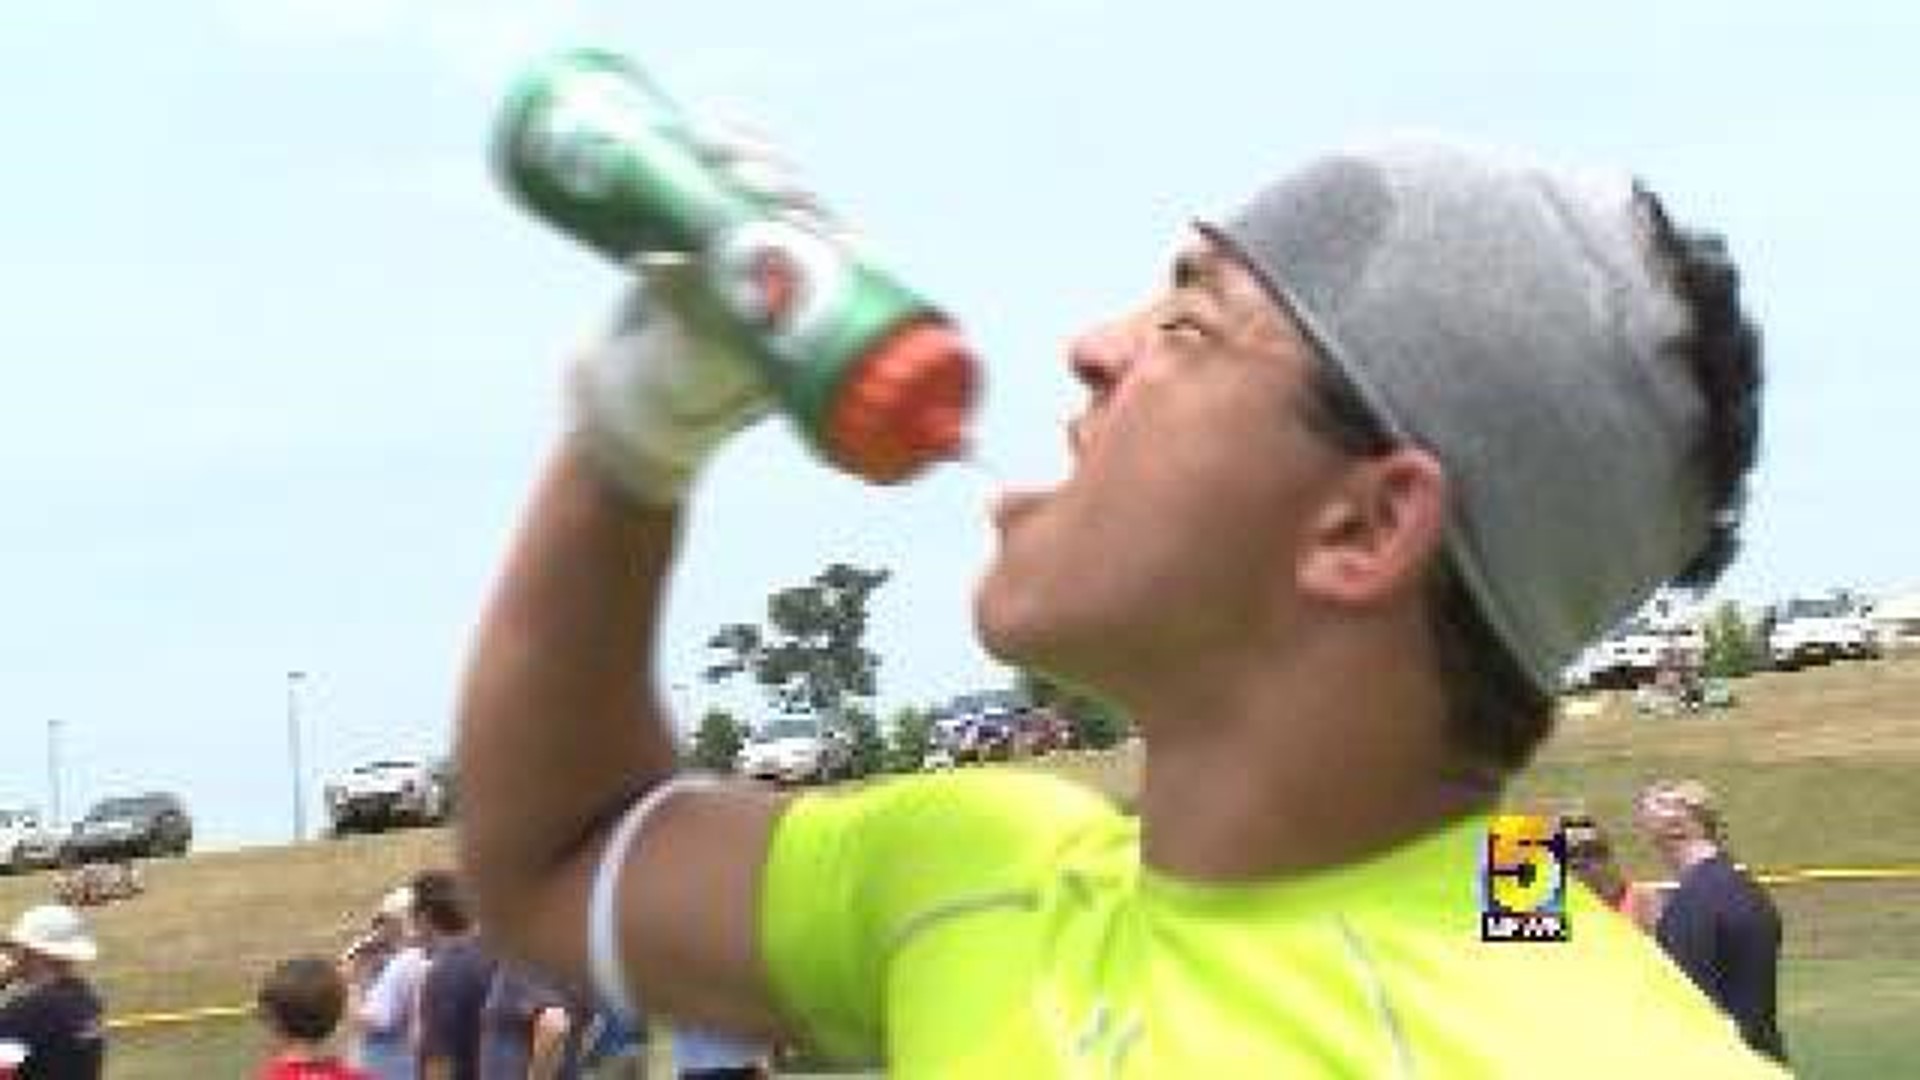 7-on-7 Tournament Provides Players with Hydration